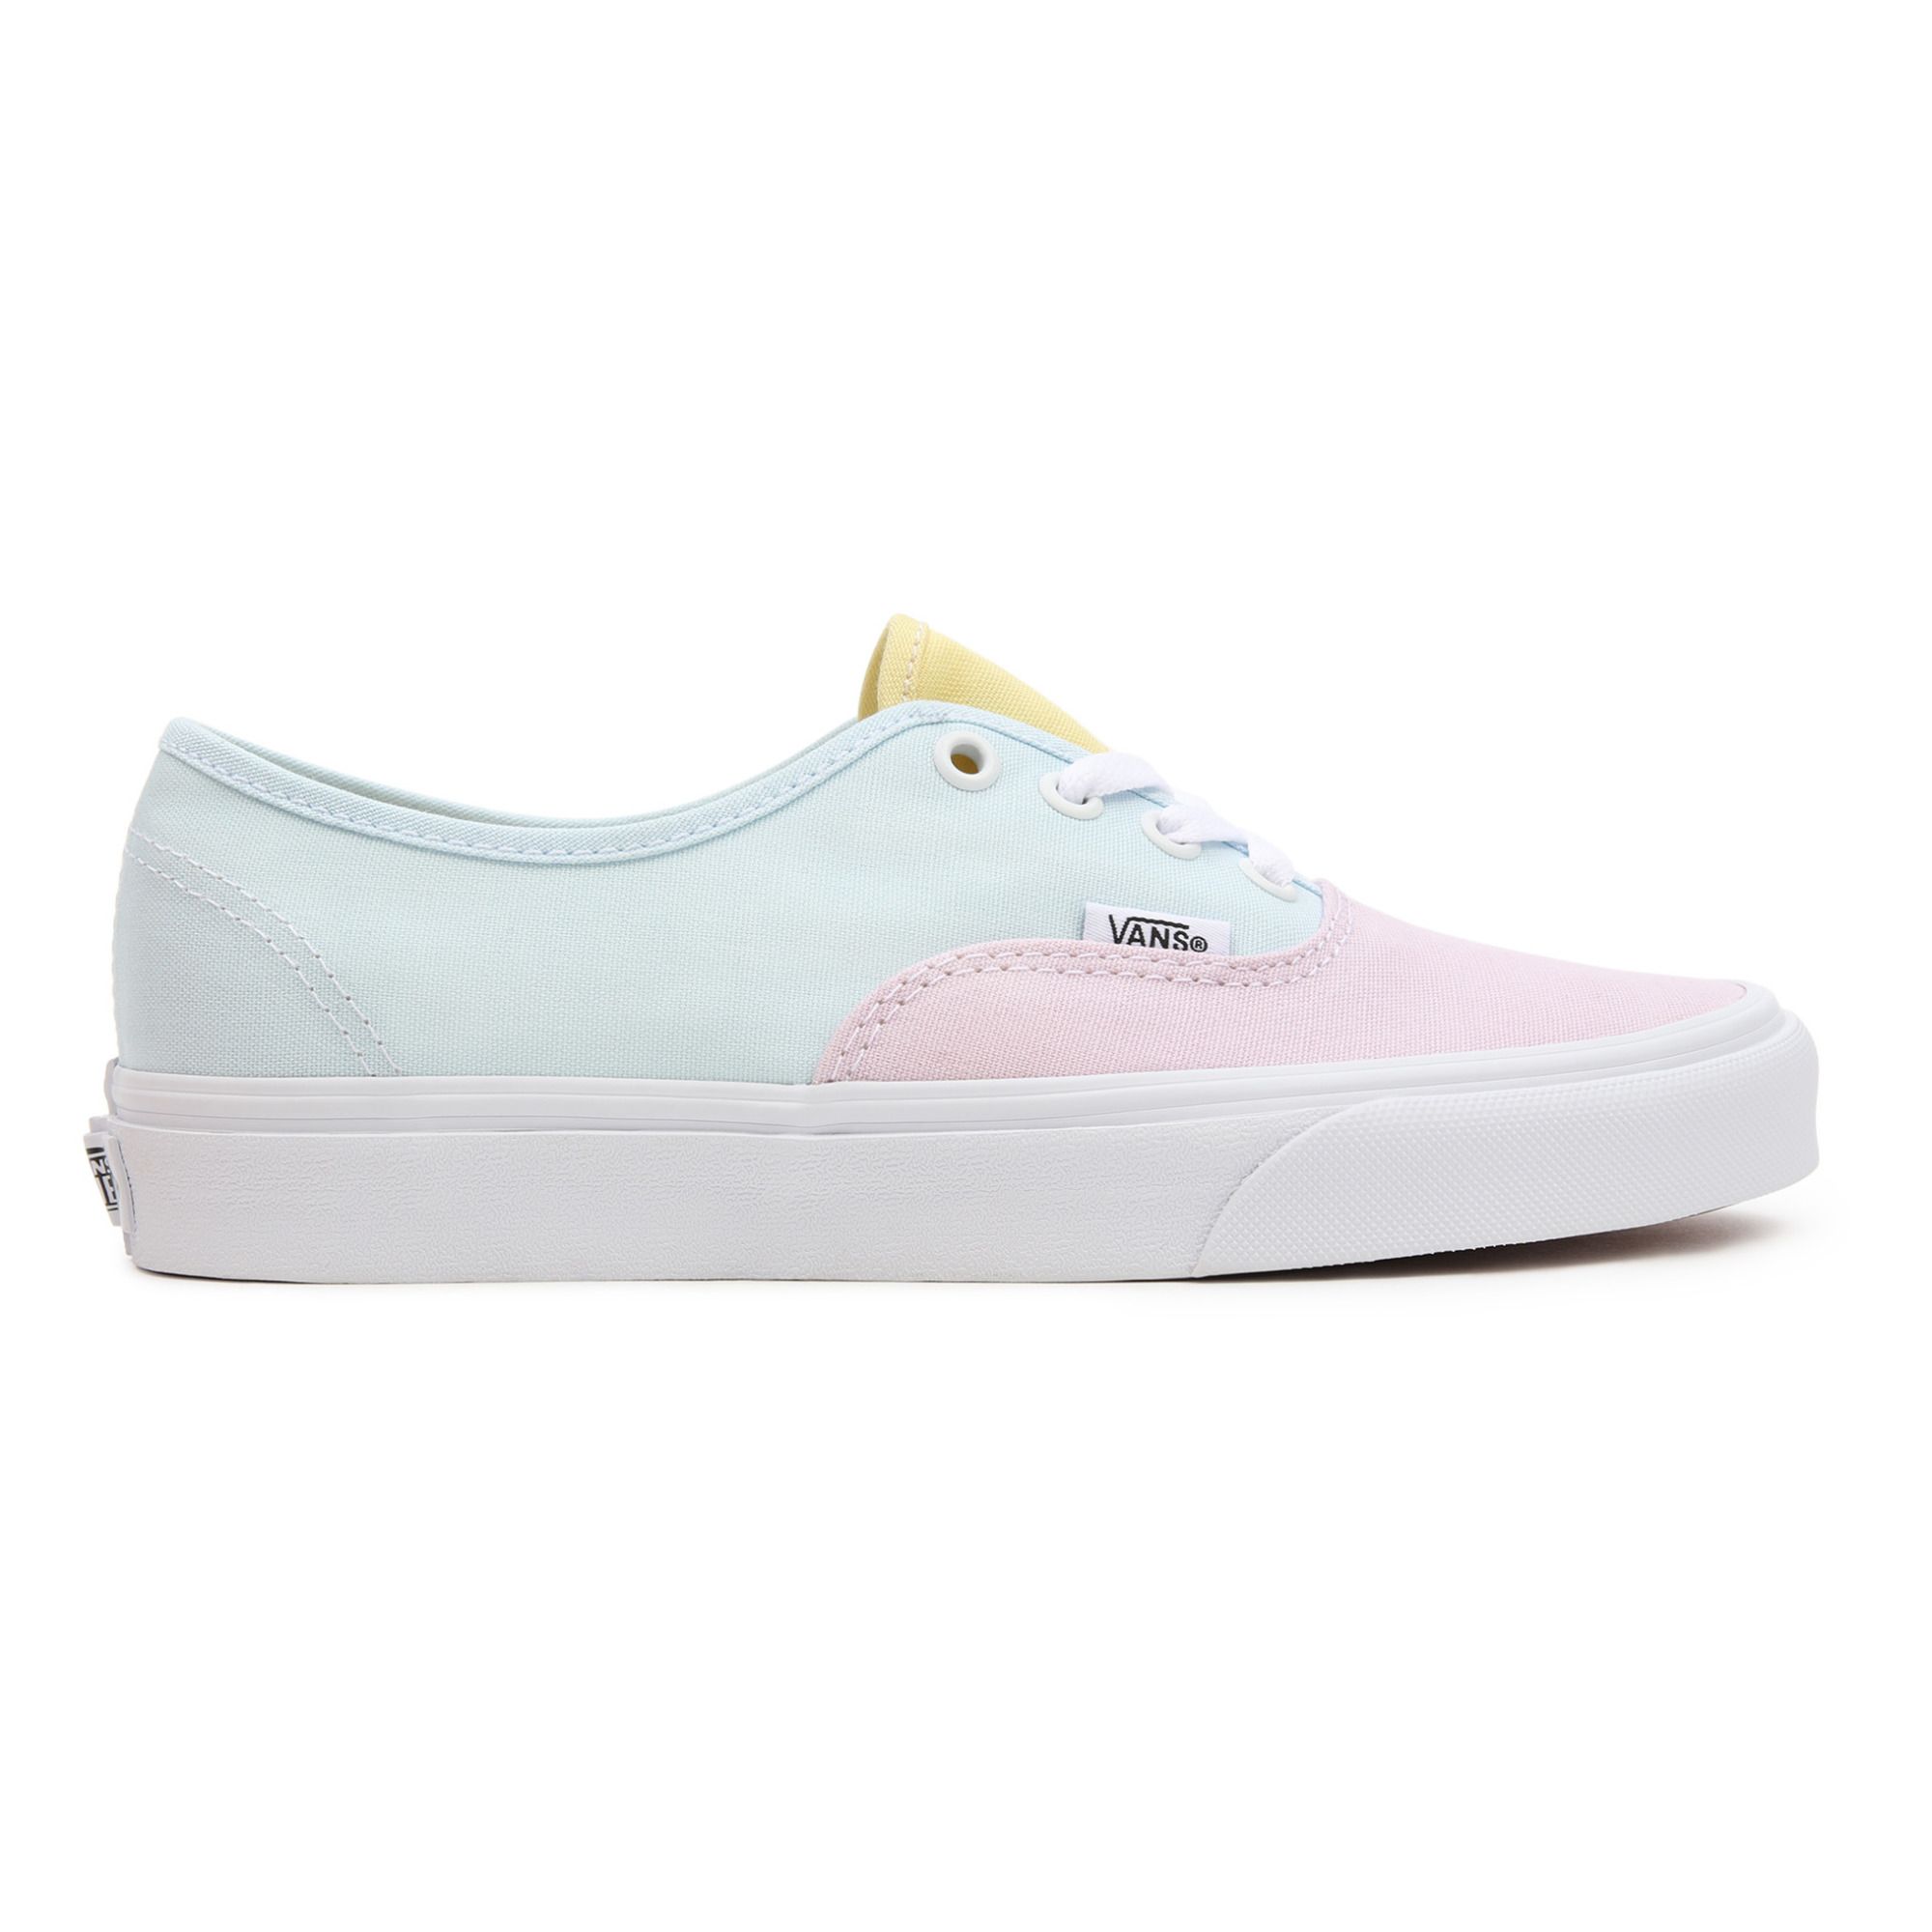 Vans - Authentic Pastel Sneakers - Adult Collection - - Light Blue |  Smallable